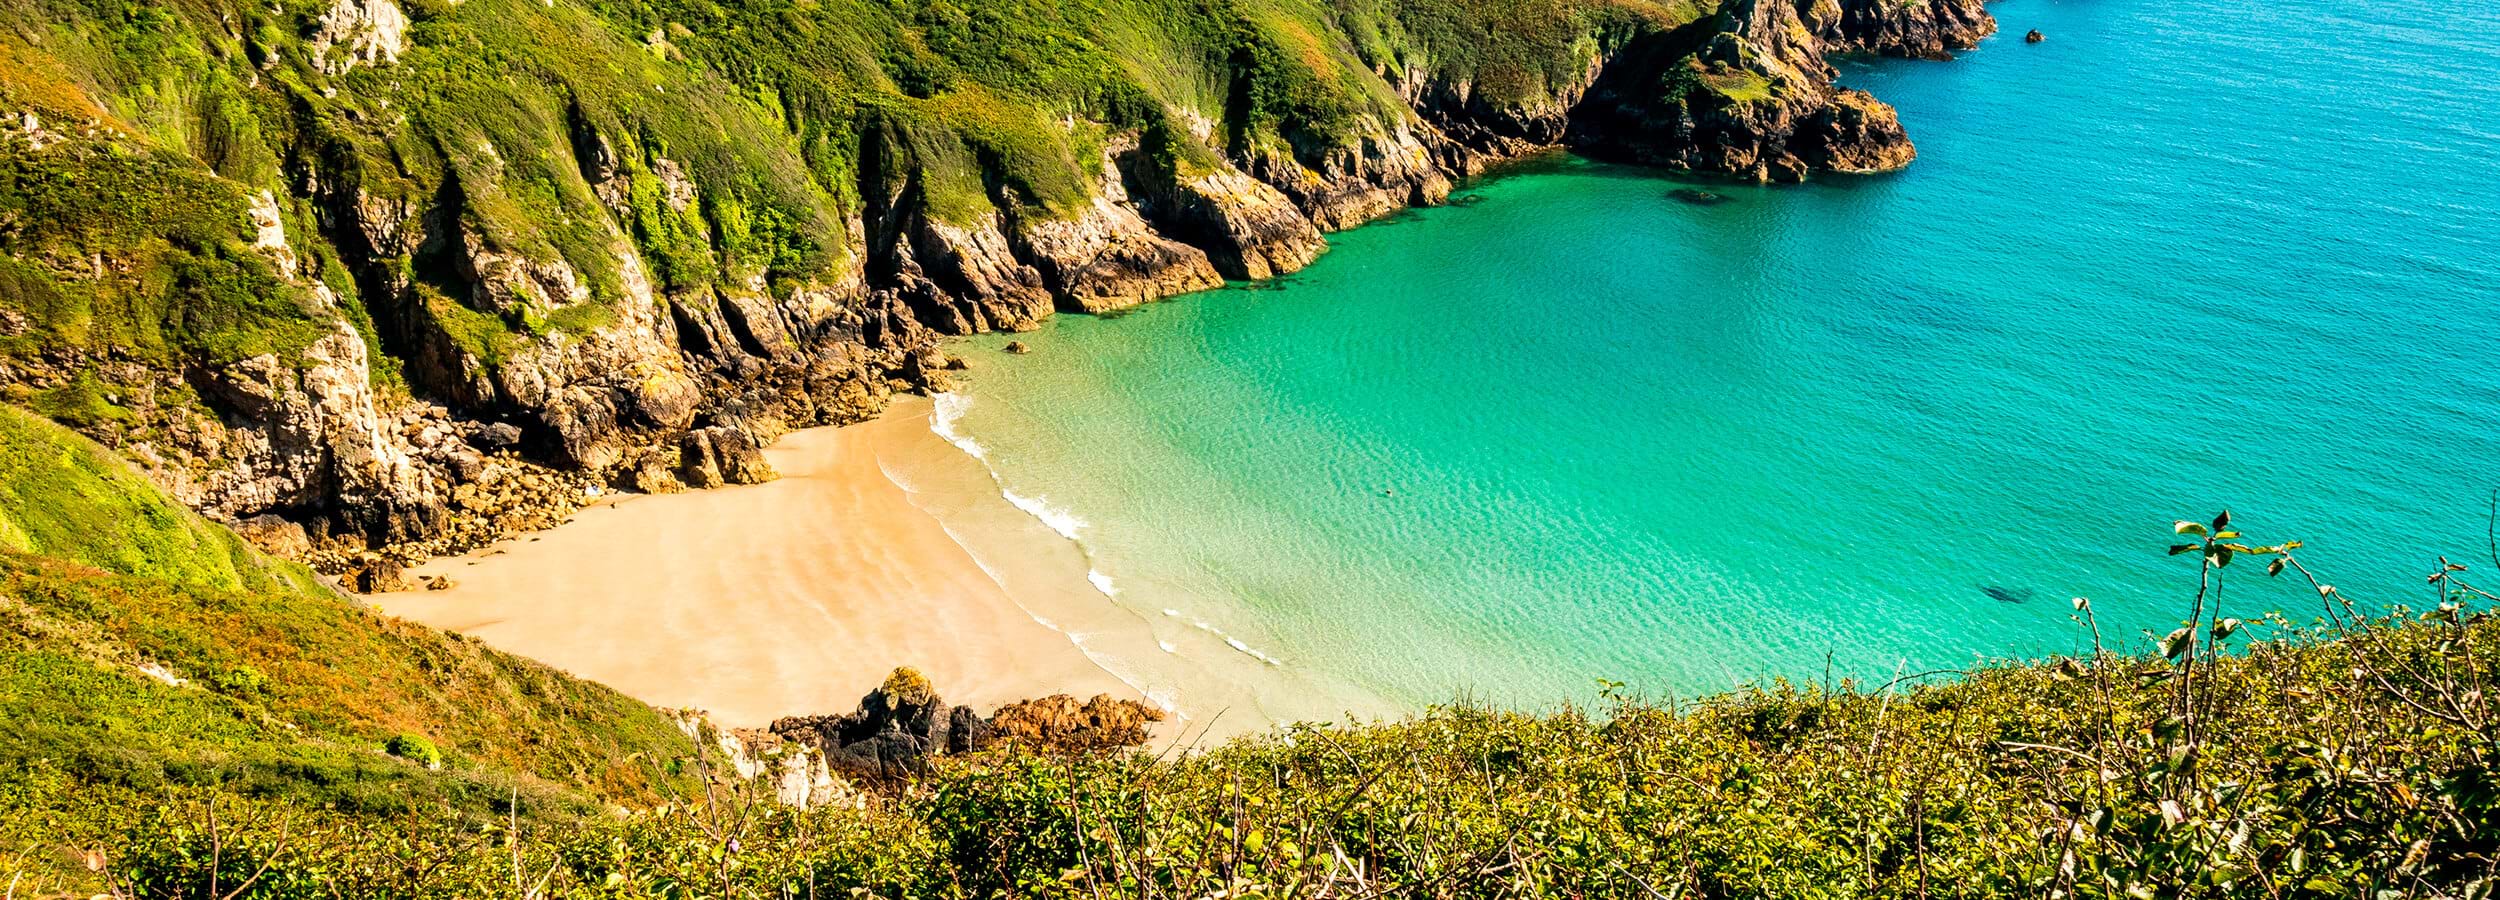 Sail away to Guernsey from £95pp with your car